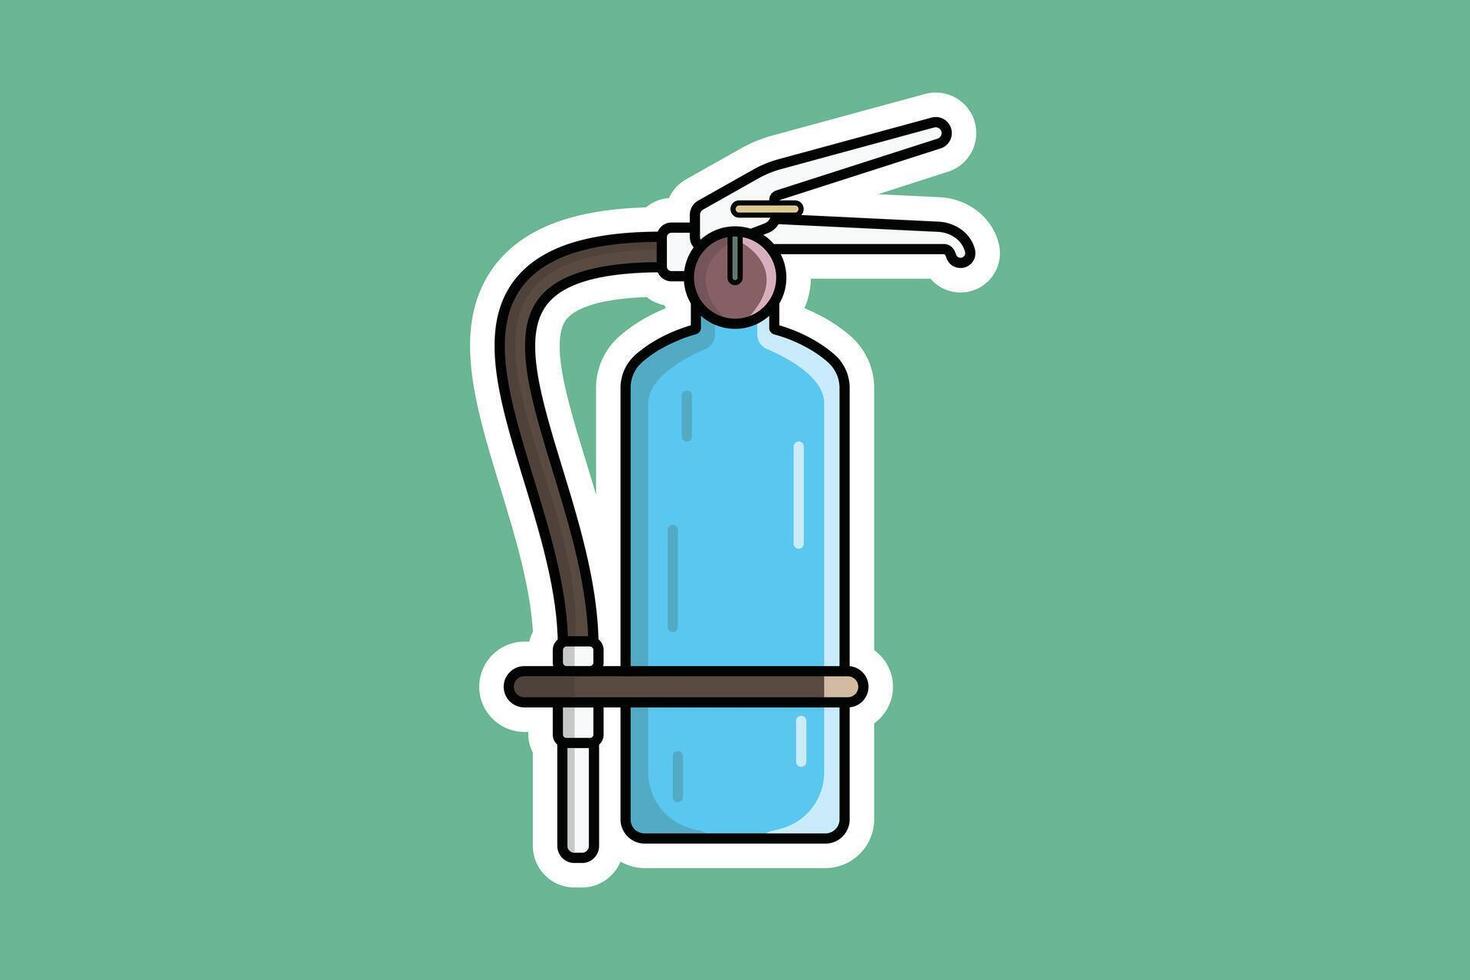 Fire Extinguisher Sticker vector illustration. People safety objects icon concept. Fire Fighter Equipment sticker design logo. Fire Safety objects icon design.